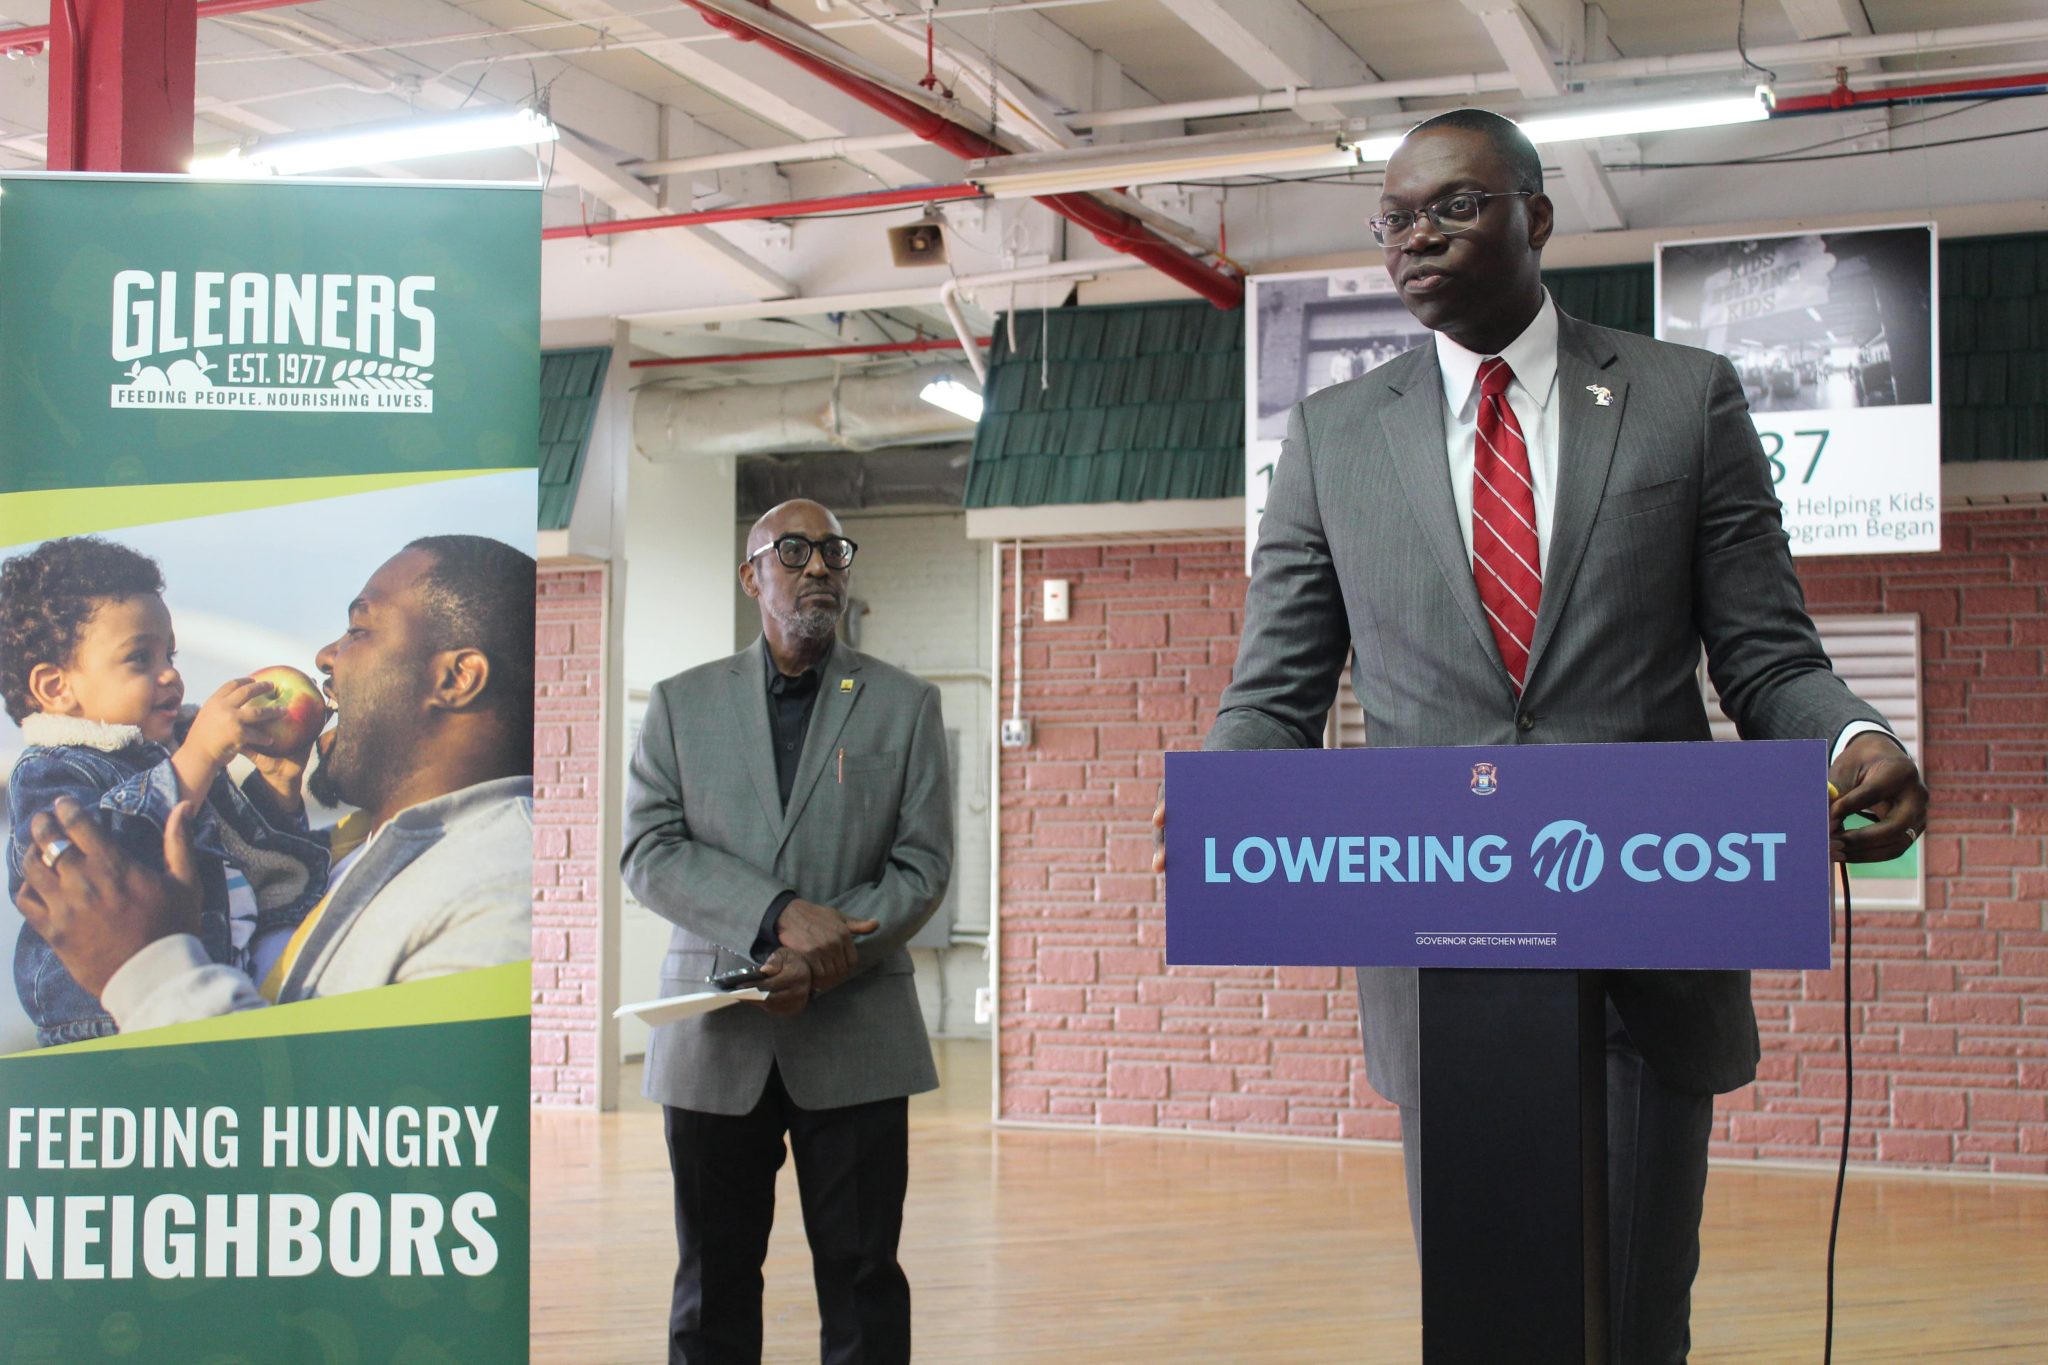 Lt. Gov. Garlin Gilchrist addresses the media and community stakeholders at Gleaners Community Food Bank on Thursday, Dec. 14.